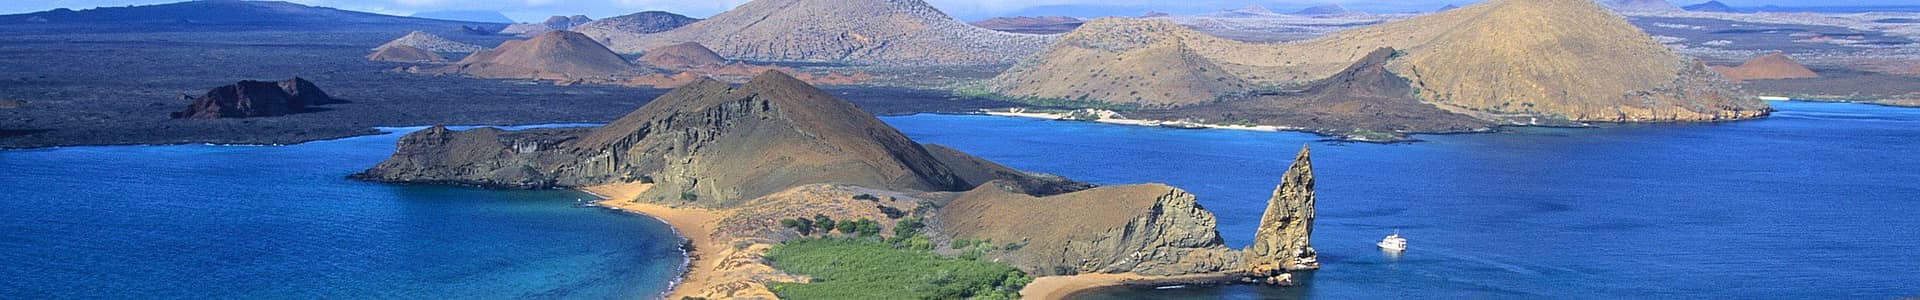 Isole Galapagos